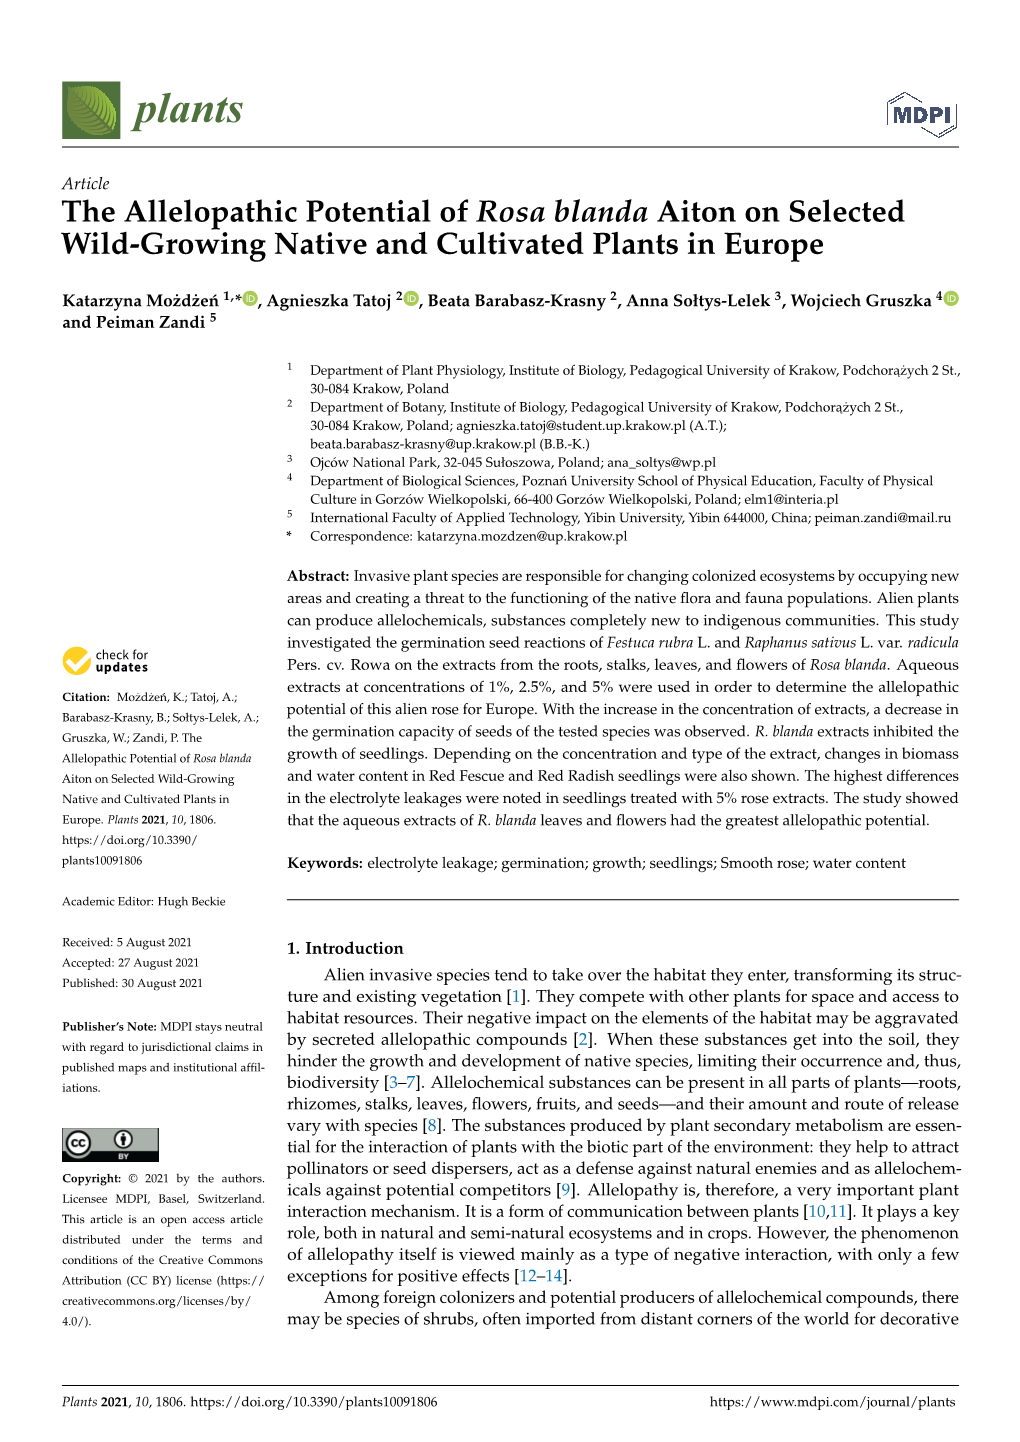 The Allelopathic Potential of Rosa Blanda Aiton on Selected Wild-Growing Native and Cultivated Plants in Europe